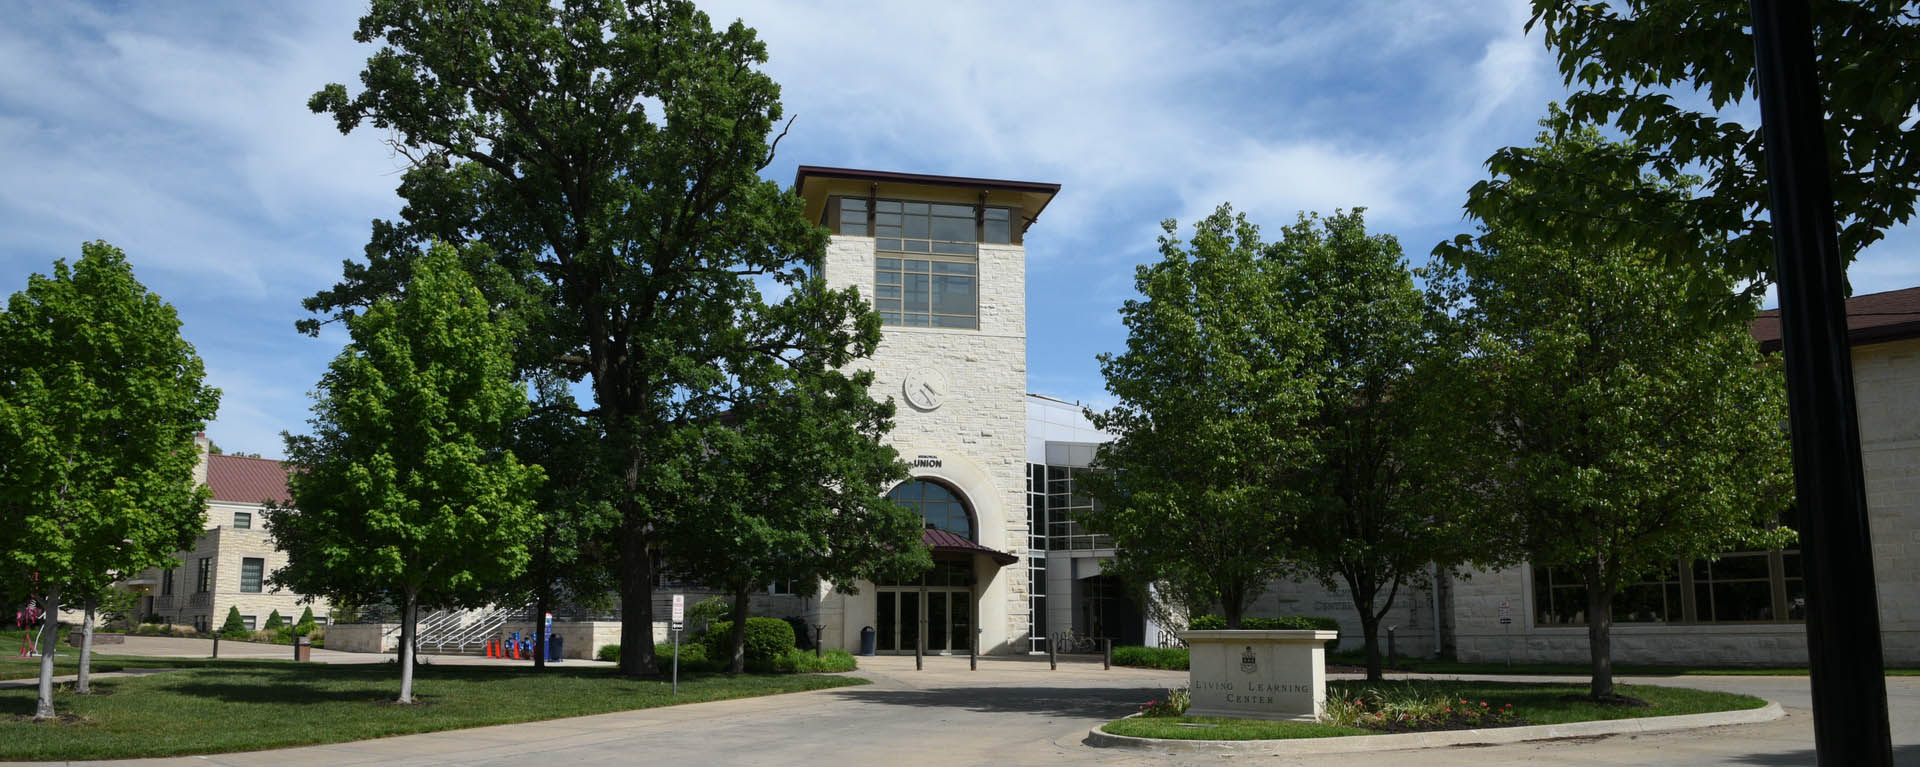 Memorial Union building entrance from campus